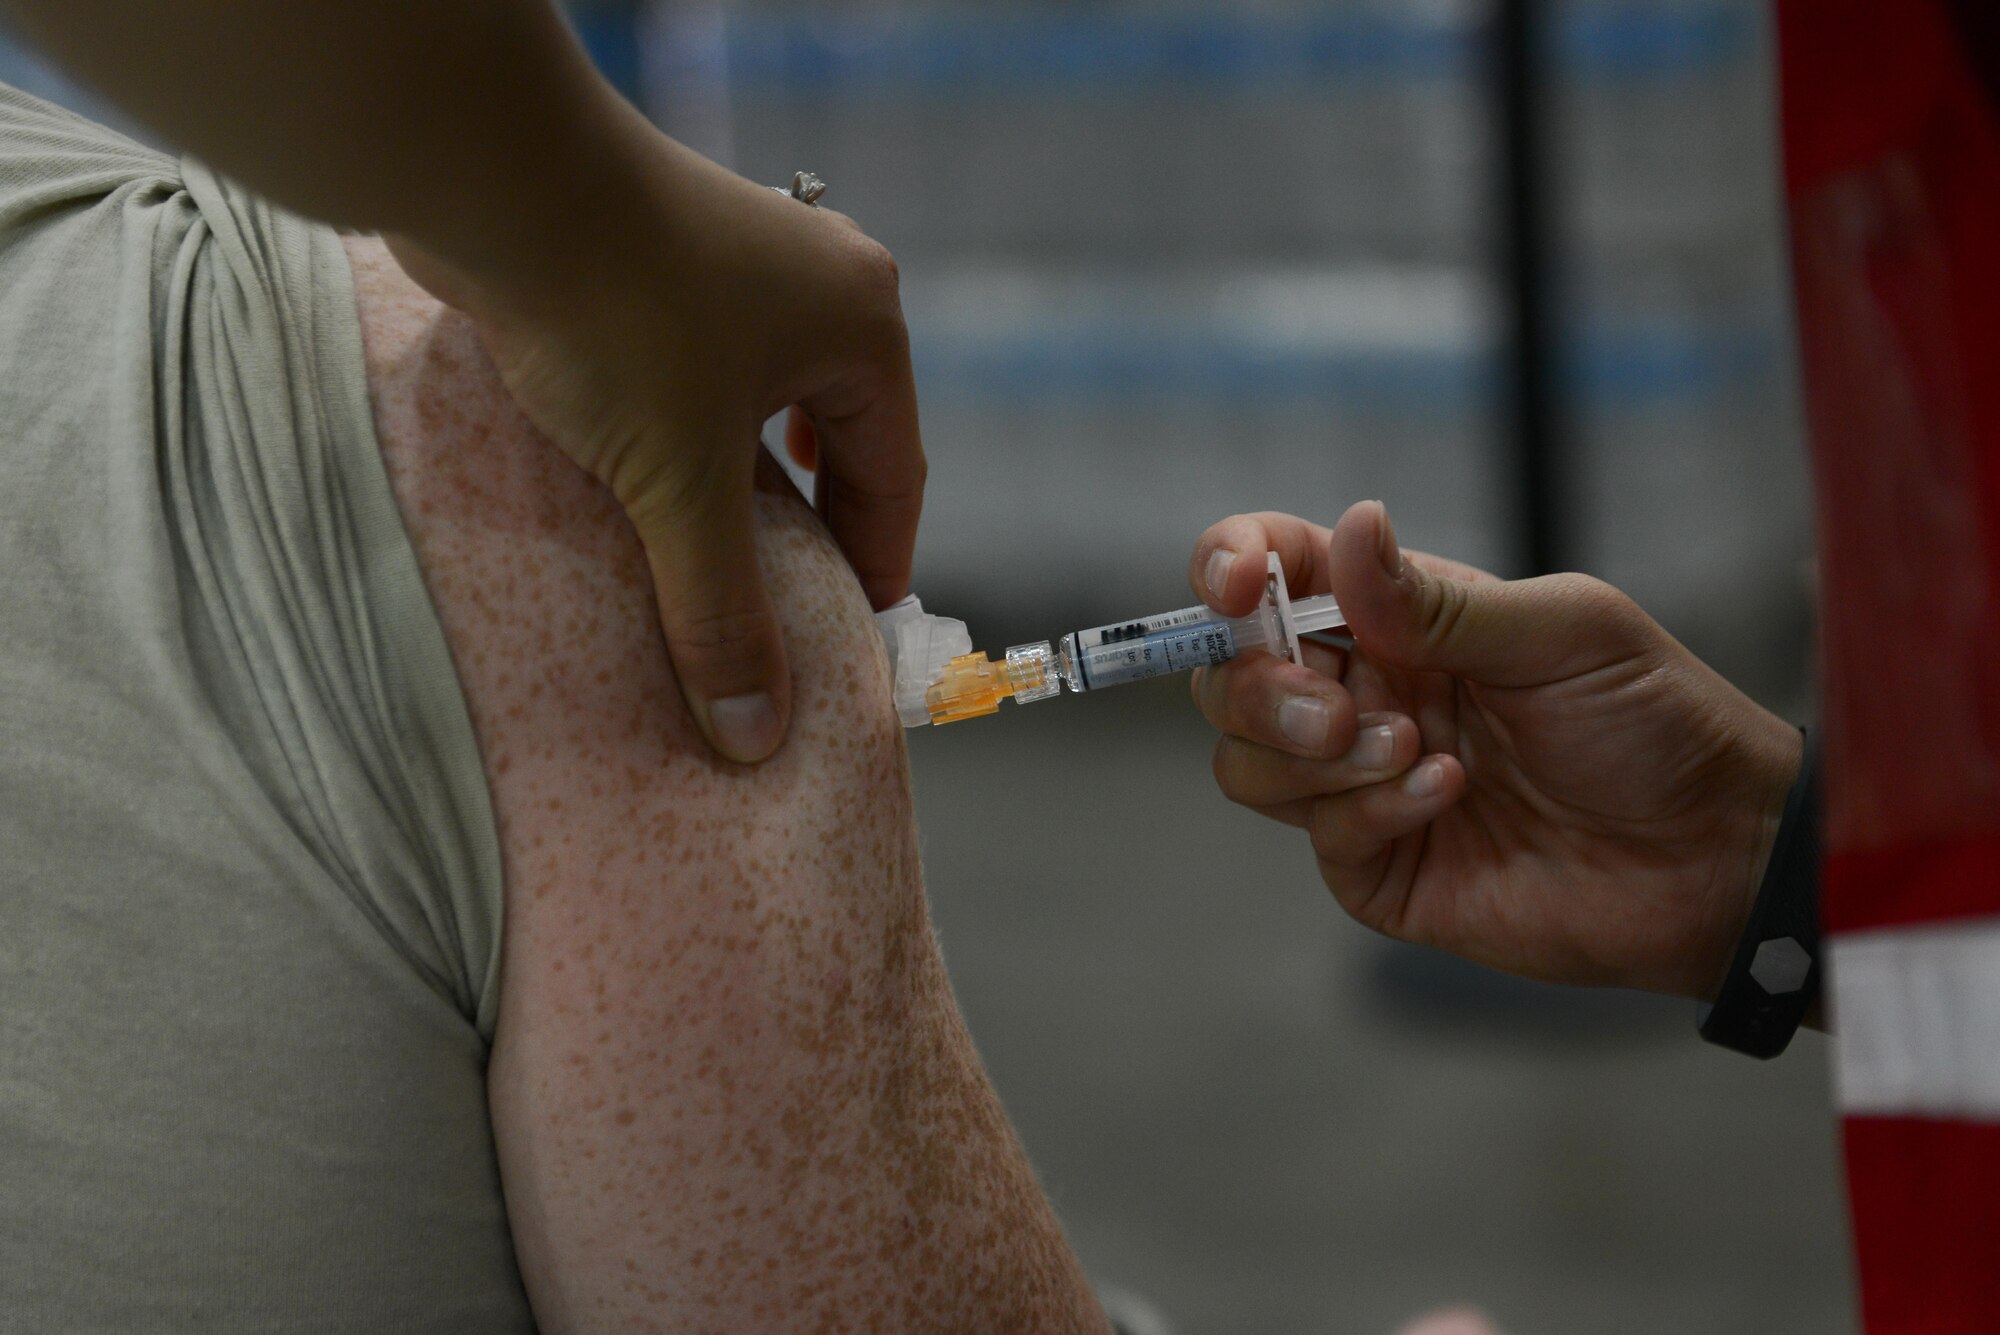 U.S. Air Force Airman 1st Class Alexandria Lovell, 39th Medical Operations Squadron family health technician, administers a flu shot to an Airman Oct. 15, 2016, at Incirlik Air Base, Turkey. The 39th MDOS is responsible for administering influenza vaccinations annually to all military personnel and civilians residing at Incirlik. (U.S. Air Force photo by Senior Airman Jasmonet Jackson)